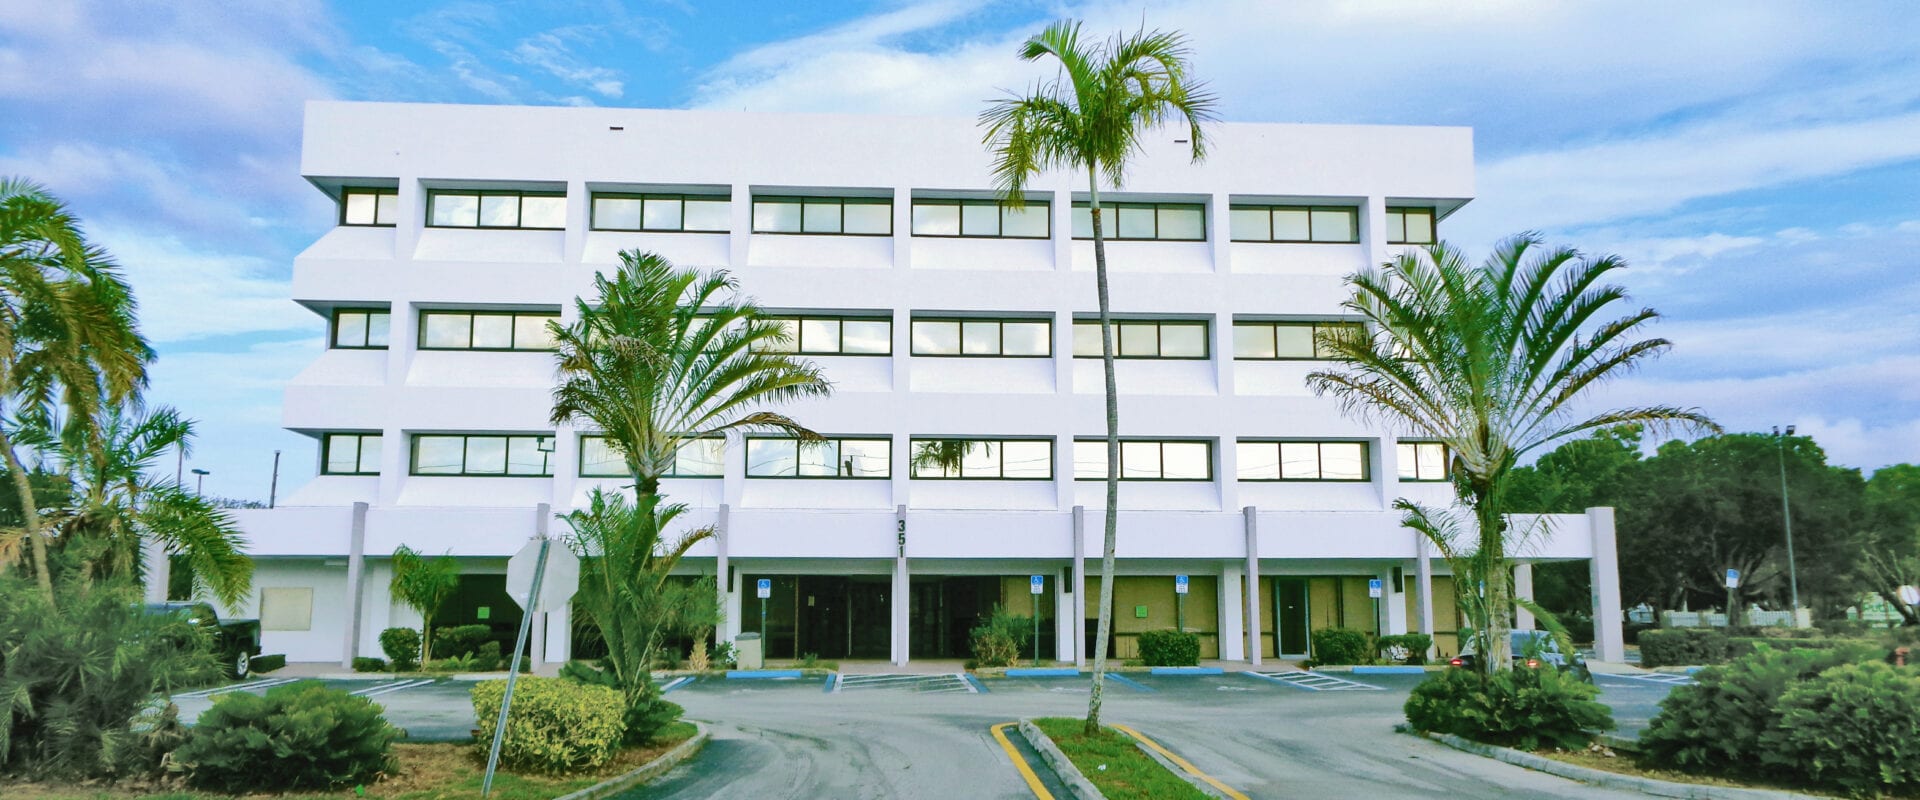 For Lease Office Space Pompano Beach 744 SF